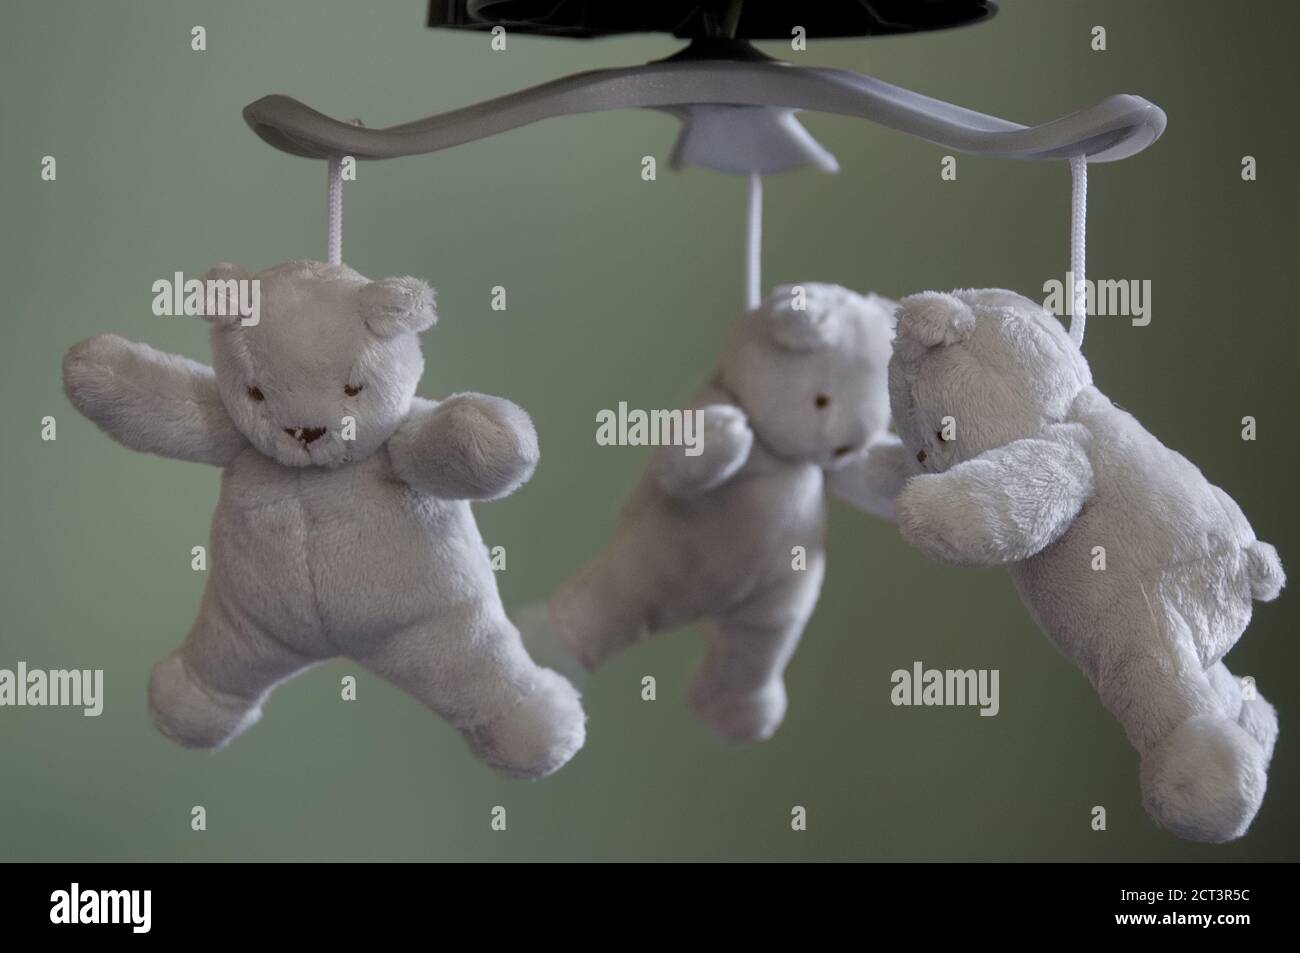 Three plush grey, white teddy bears hanging from a baby mobile, focus on foreground Stock Photo